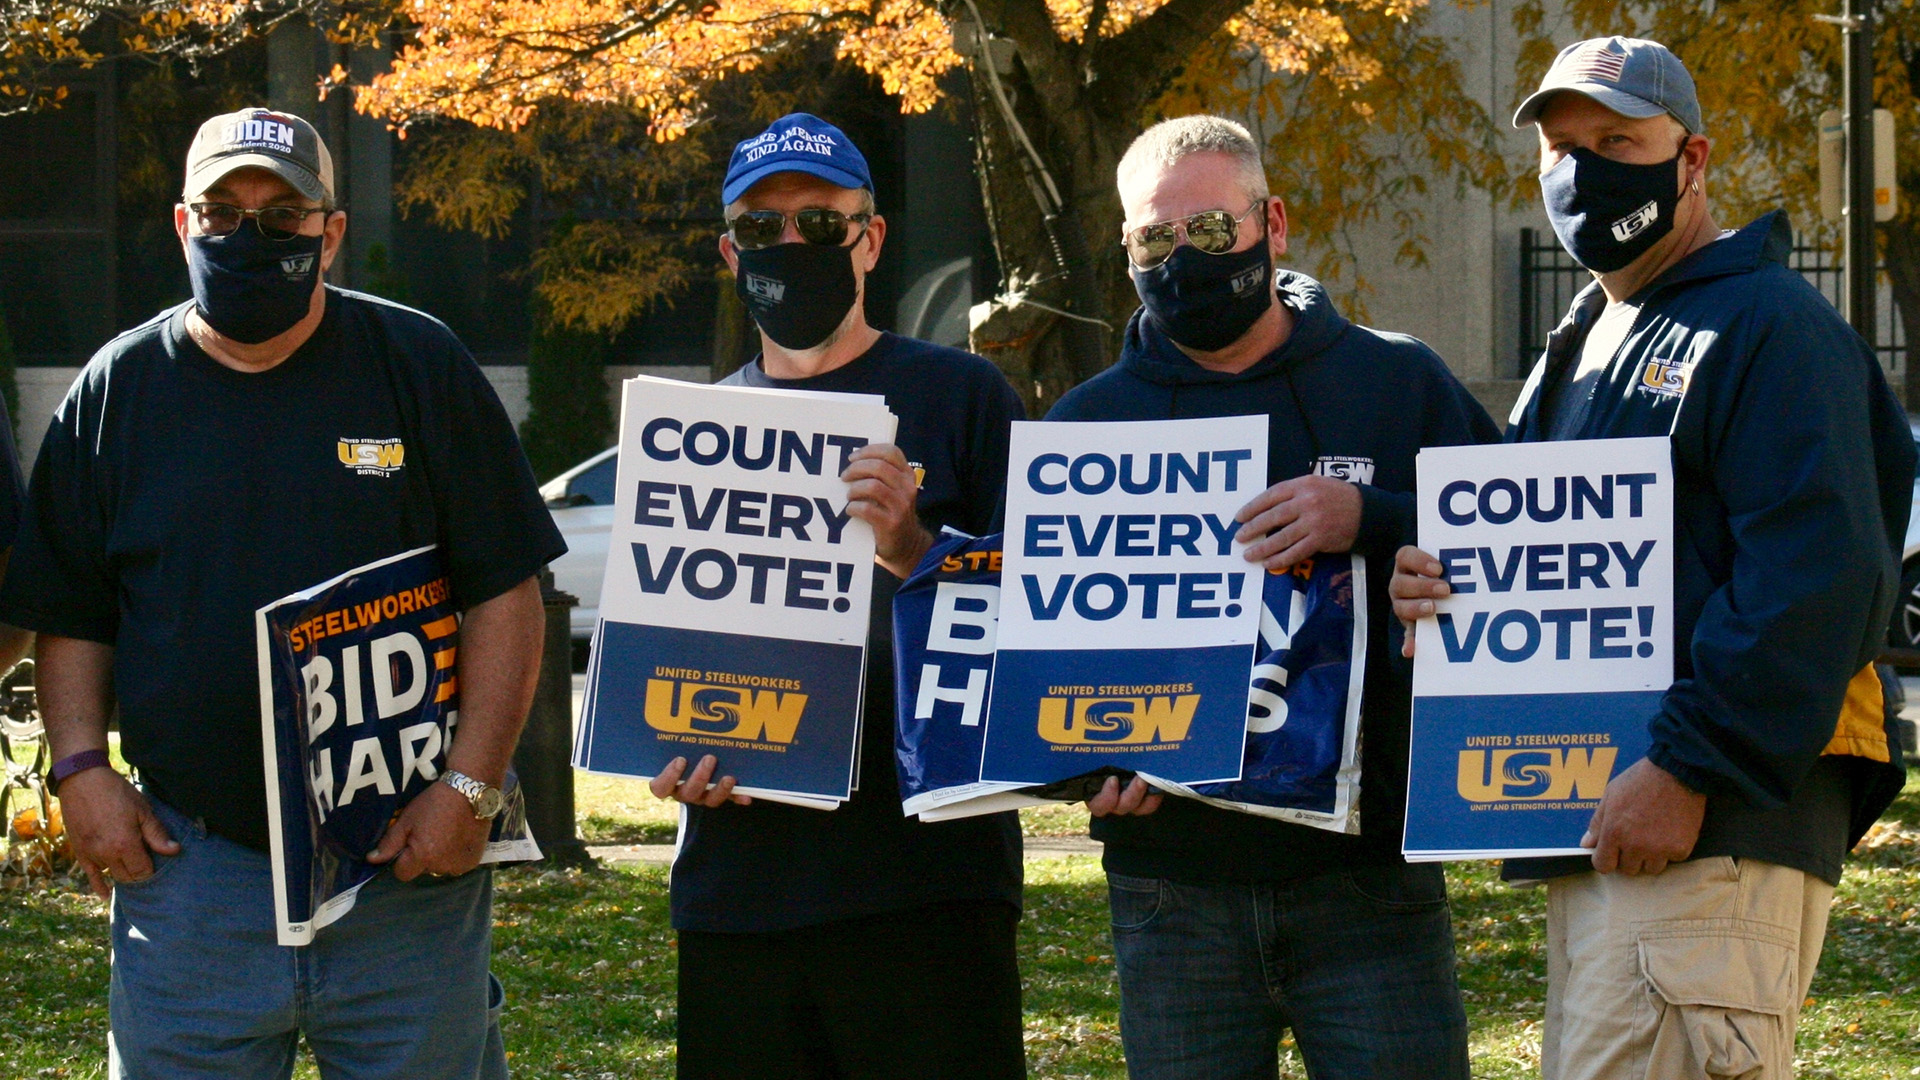 Four members of United Steelworkers stand outside while holding signs reading "Steelworkers for Biden Harris" and "Count Every Vote!"